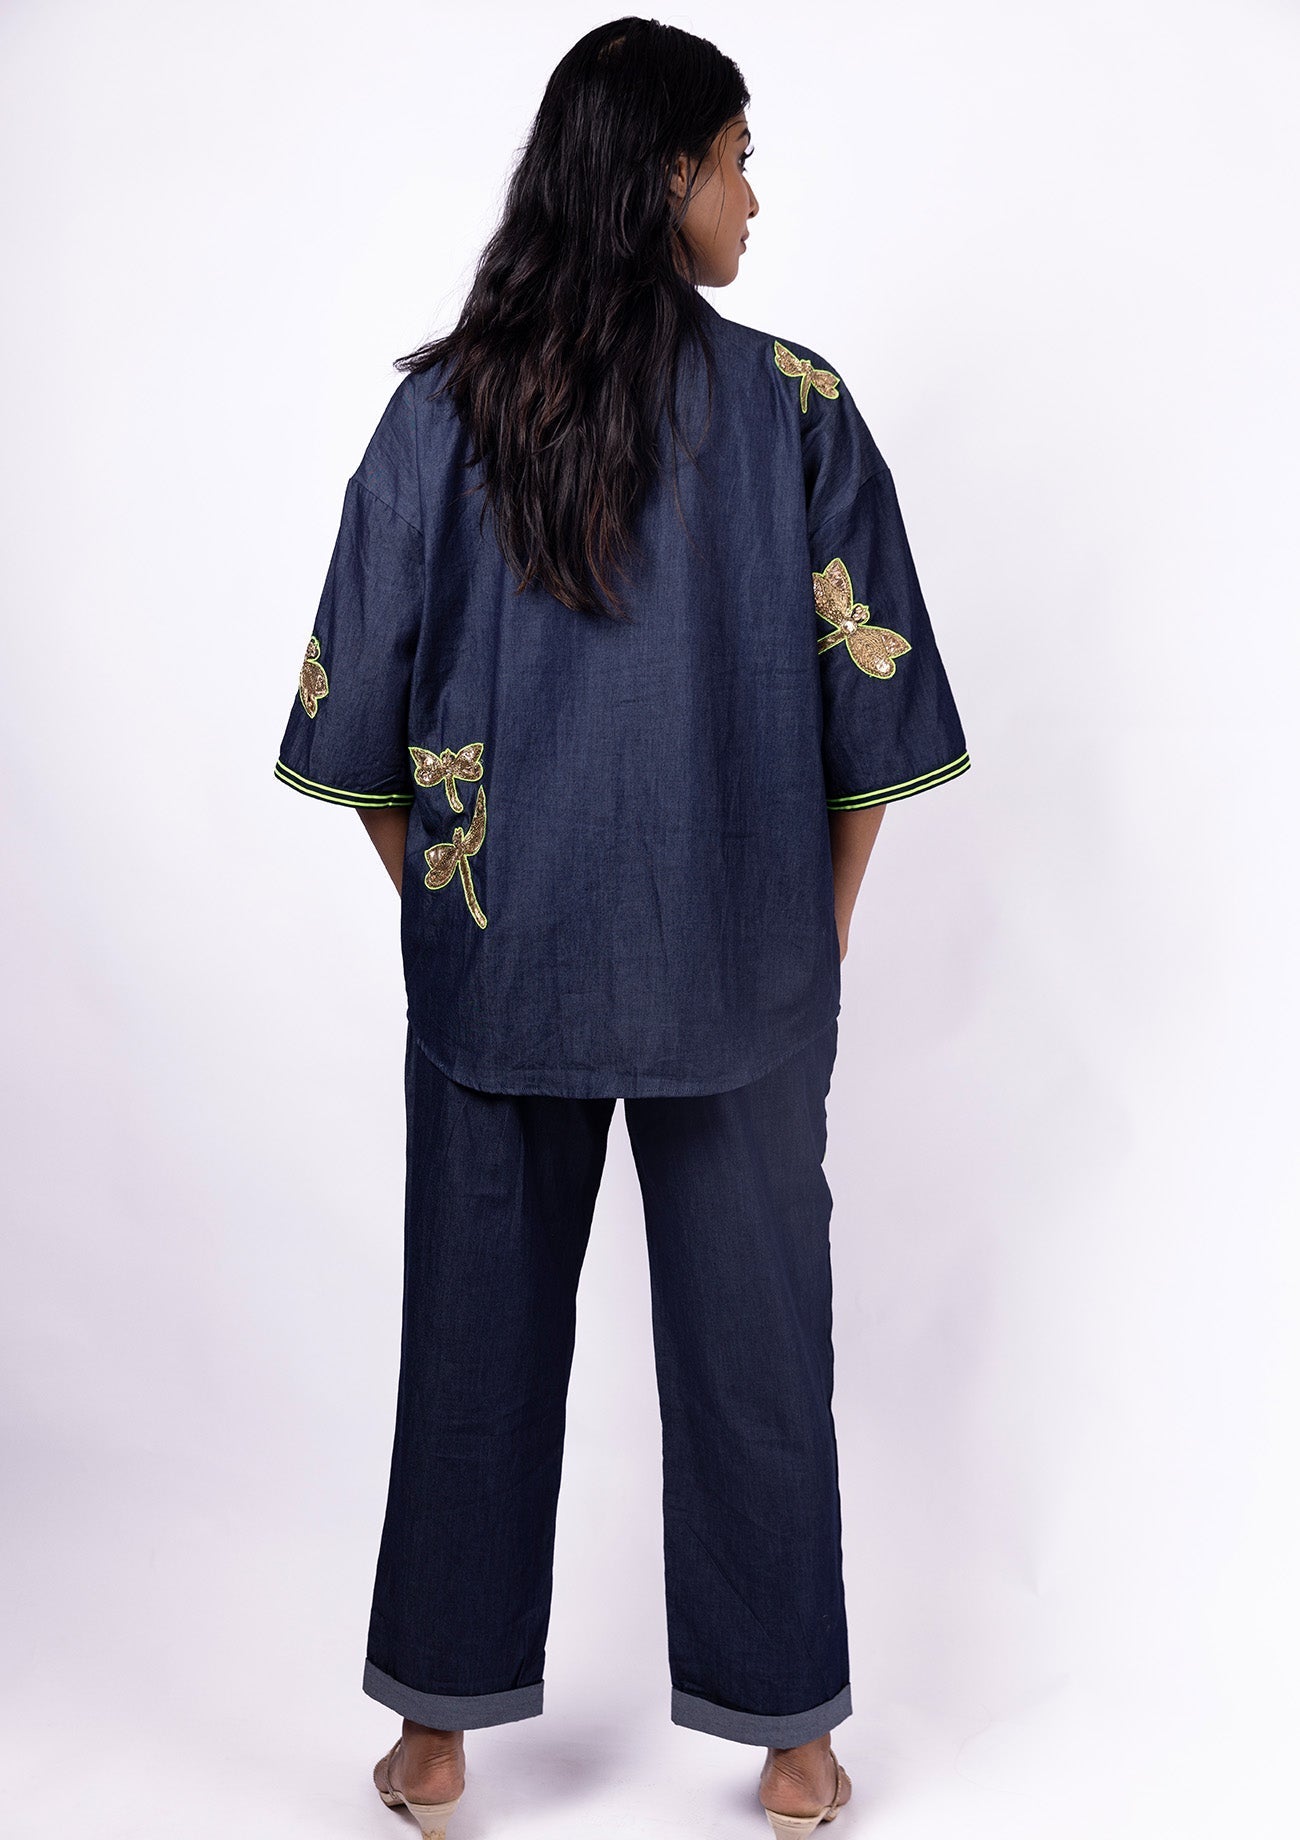 Denim Oversized Shirt With Multiple Embroidered Dragonflies With Denim Straight Pants With Single Embroidered Motif And Tape